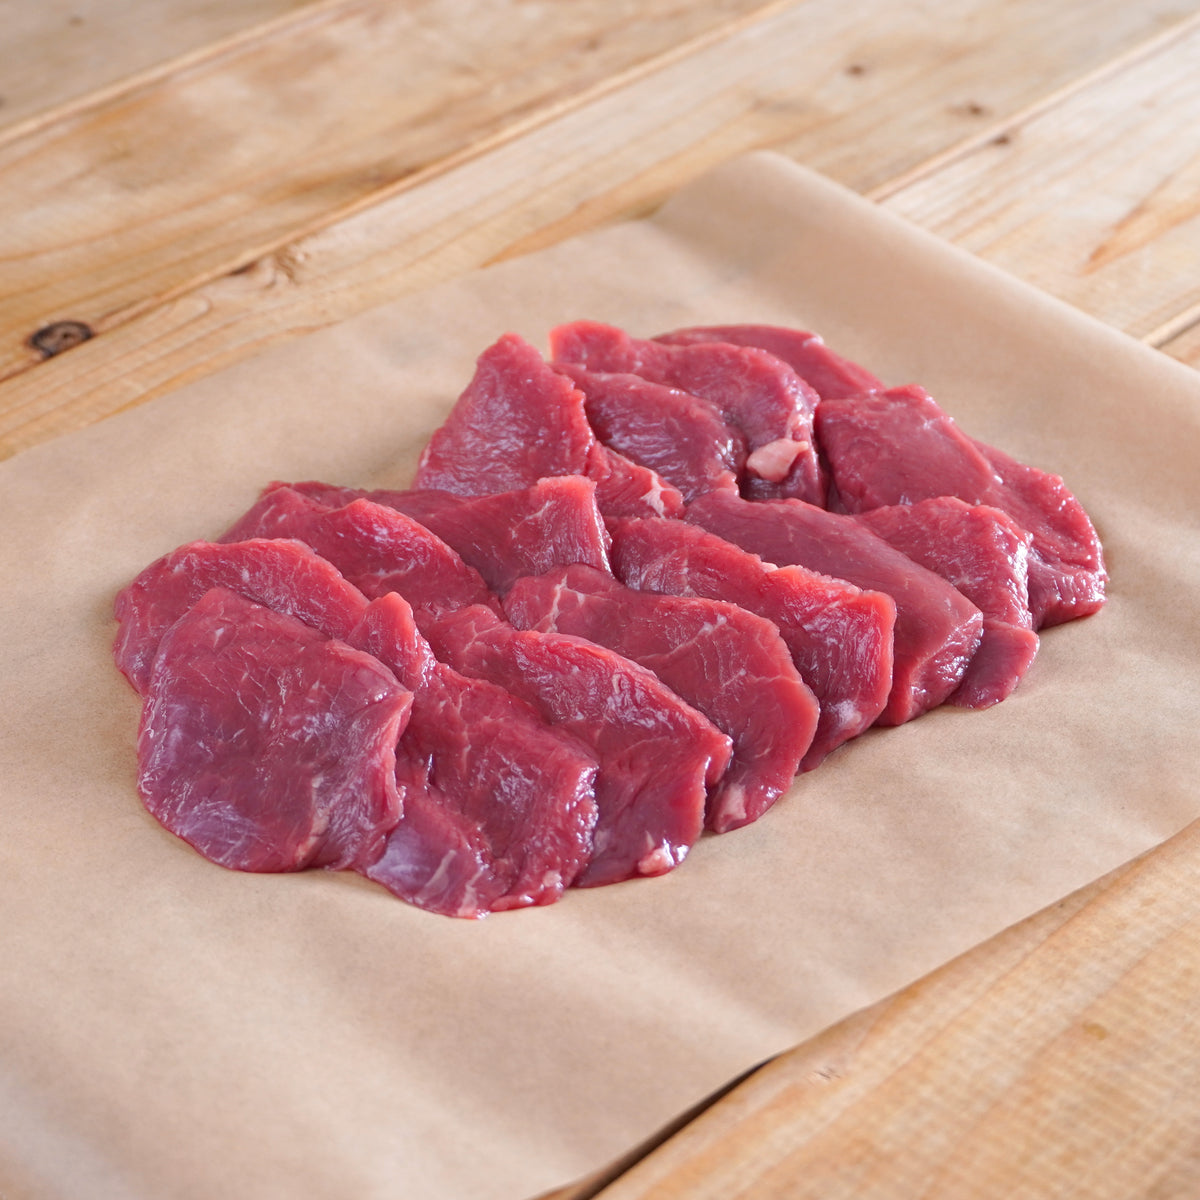 Grass-Fed Beef Teres Major / Petite Tender Slices from New Zealand (300g) - Horizon Farms